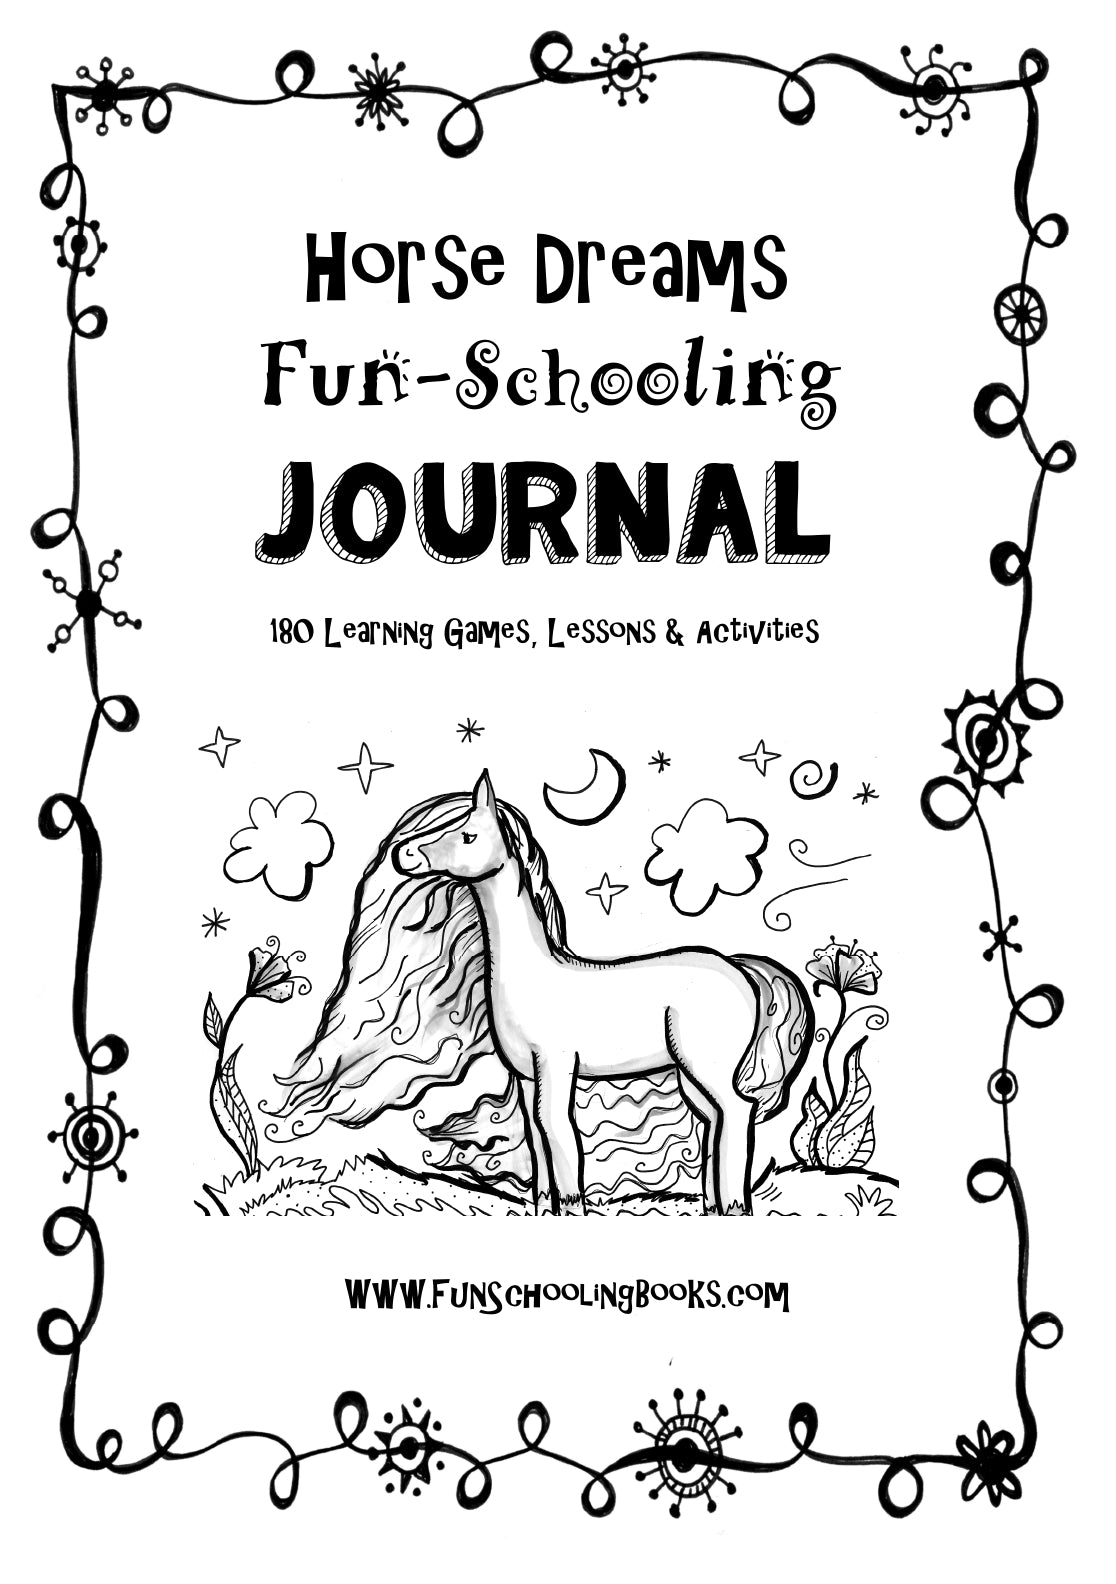 (Age 8+) Horse Dreams - Fun-Schooling Journal: 180 Learning Games